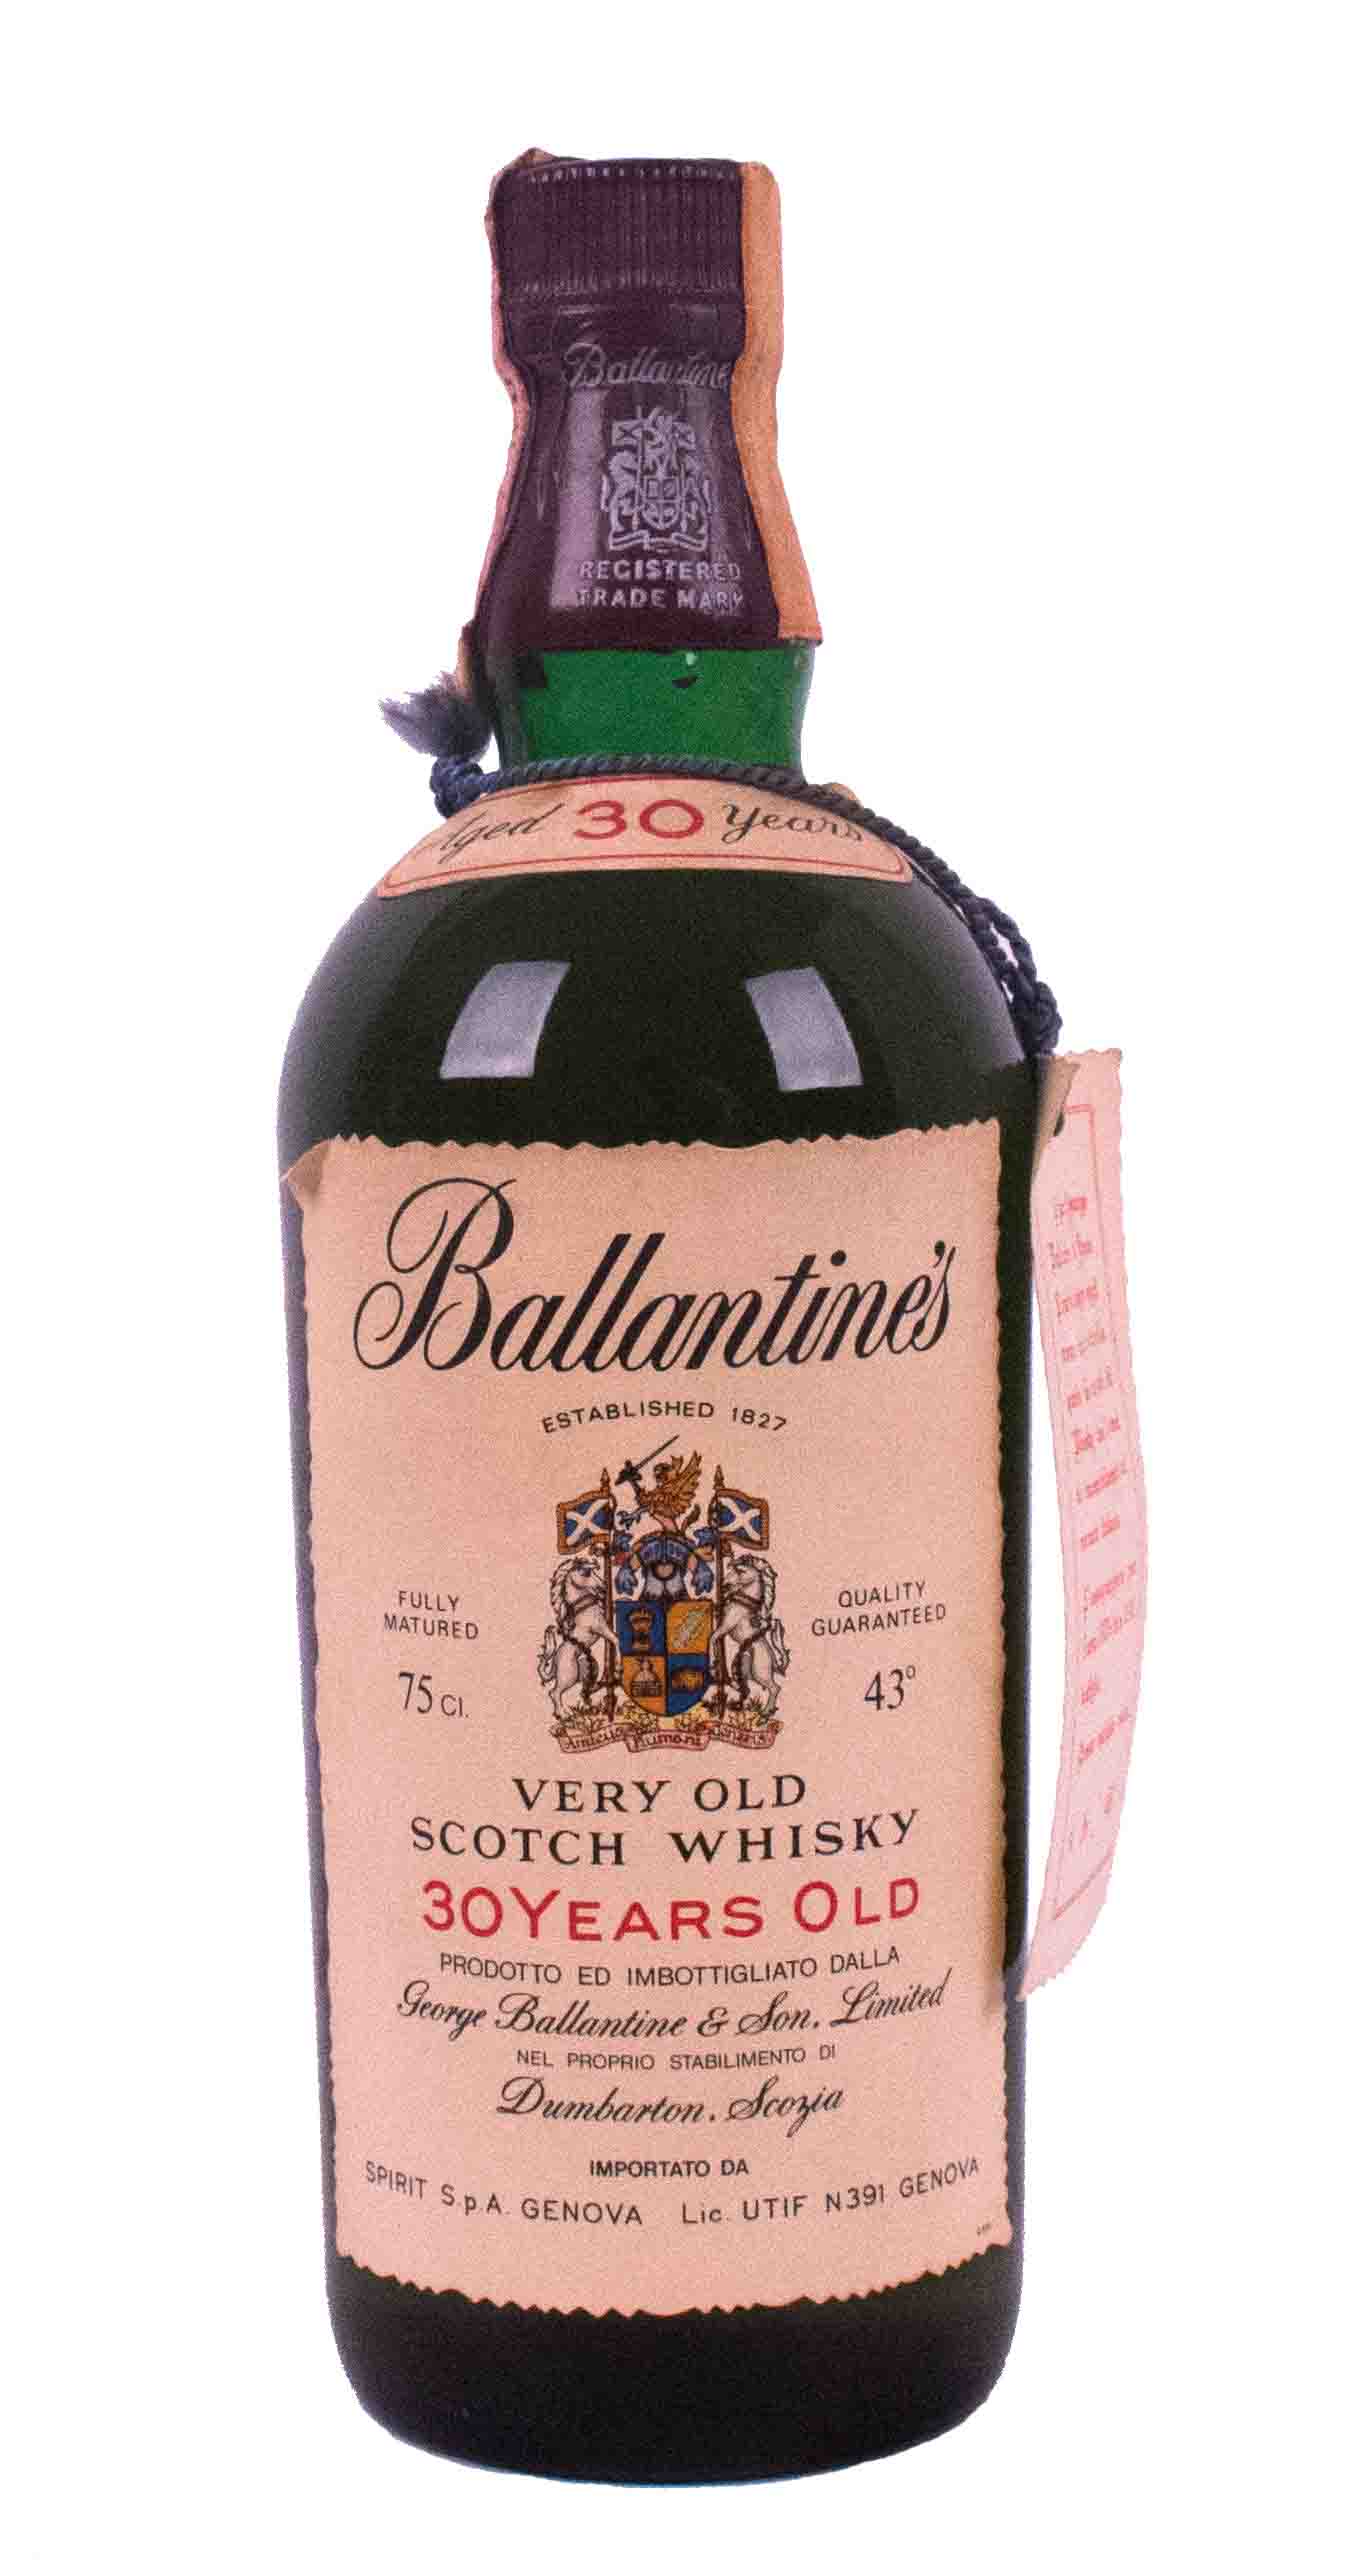 Ballantine's Very Old 30 years old | ANSUINI ASTE | ArsValue.com